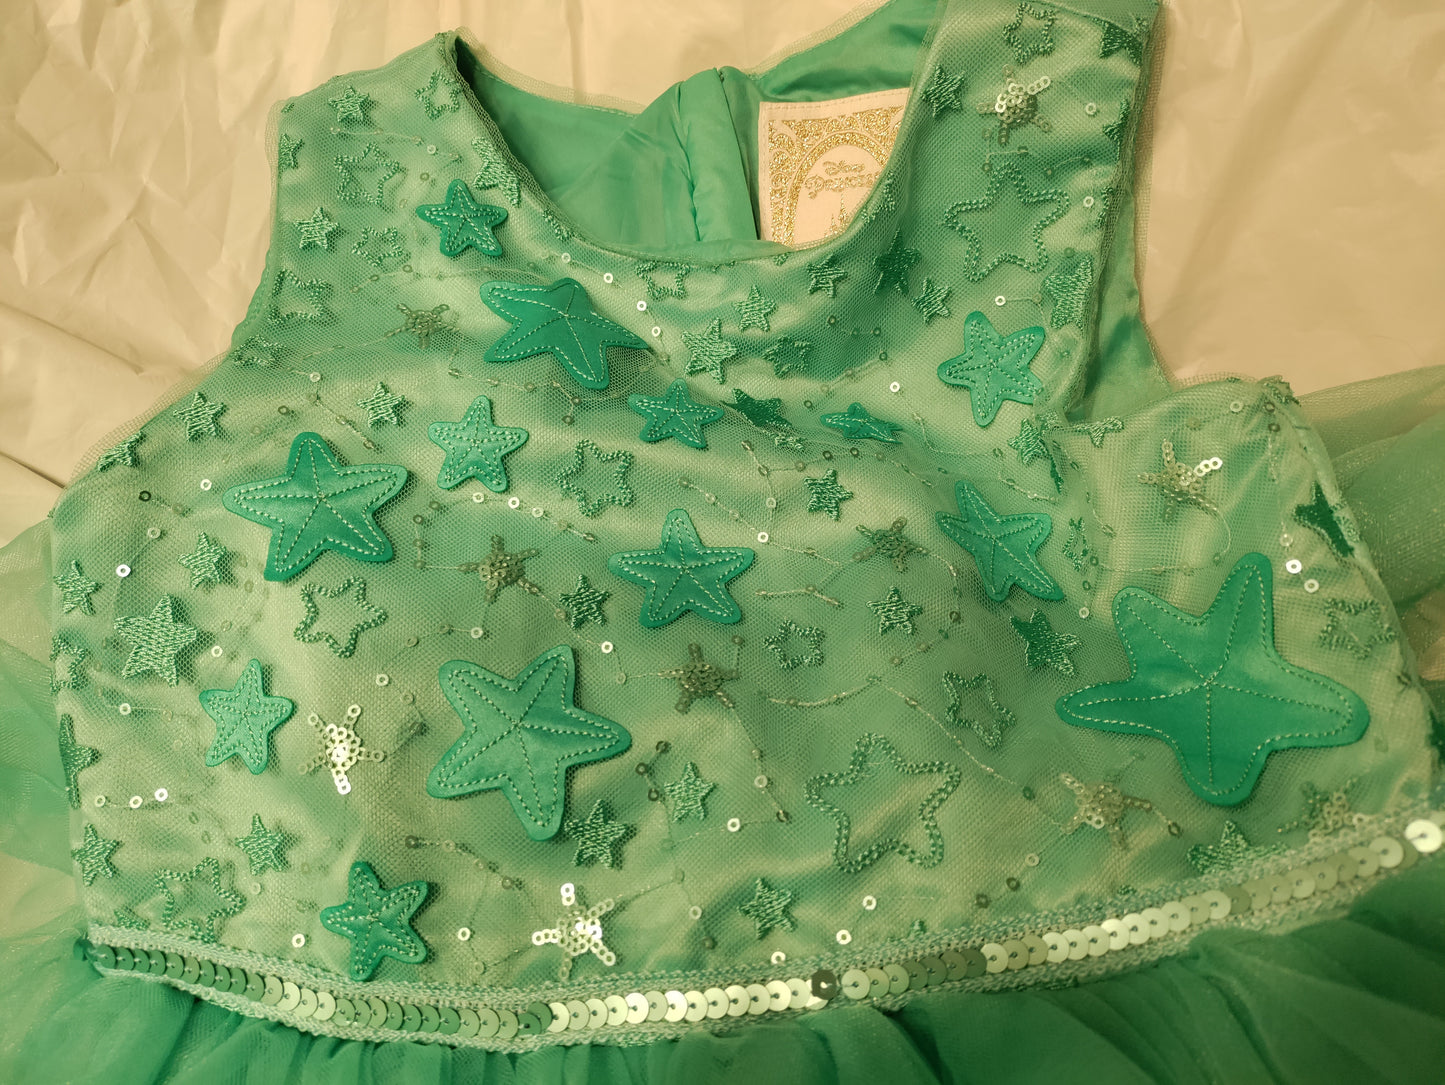 Teal Little mermaid inspired dress by Disney girls size 7/8 * reduced *